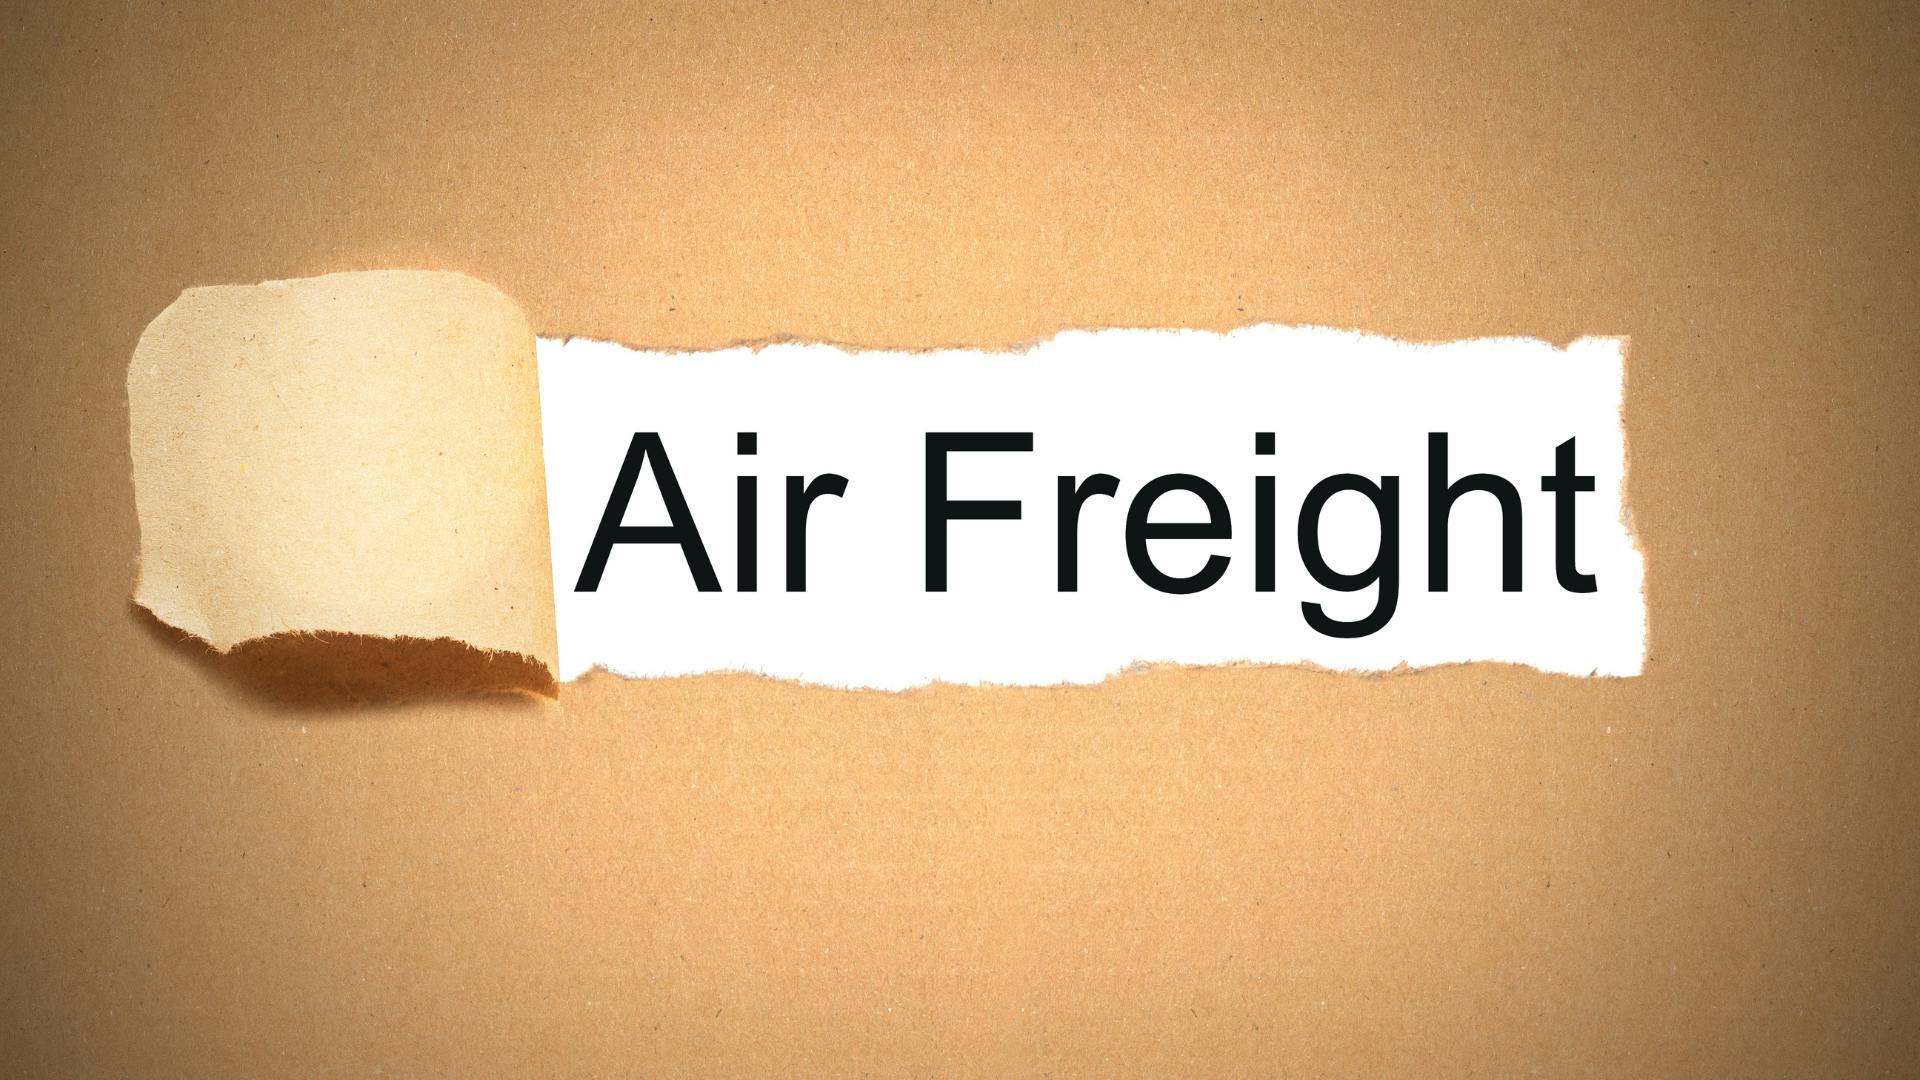 A brown backgroun ripped apart like paper, written 'Air Freight' on white background. 